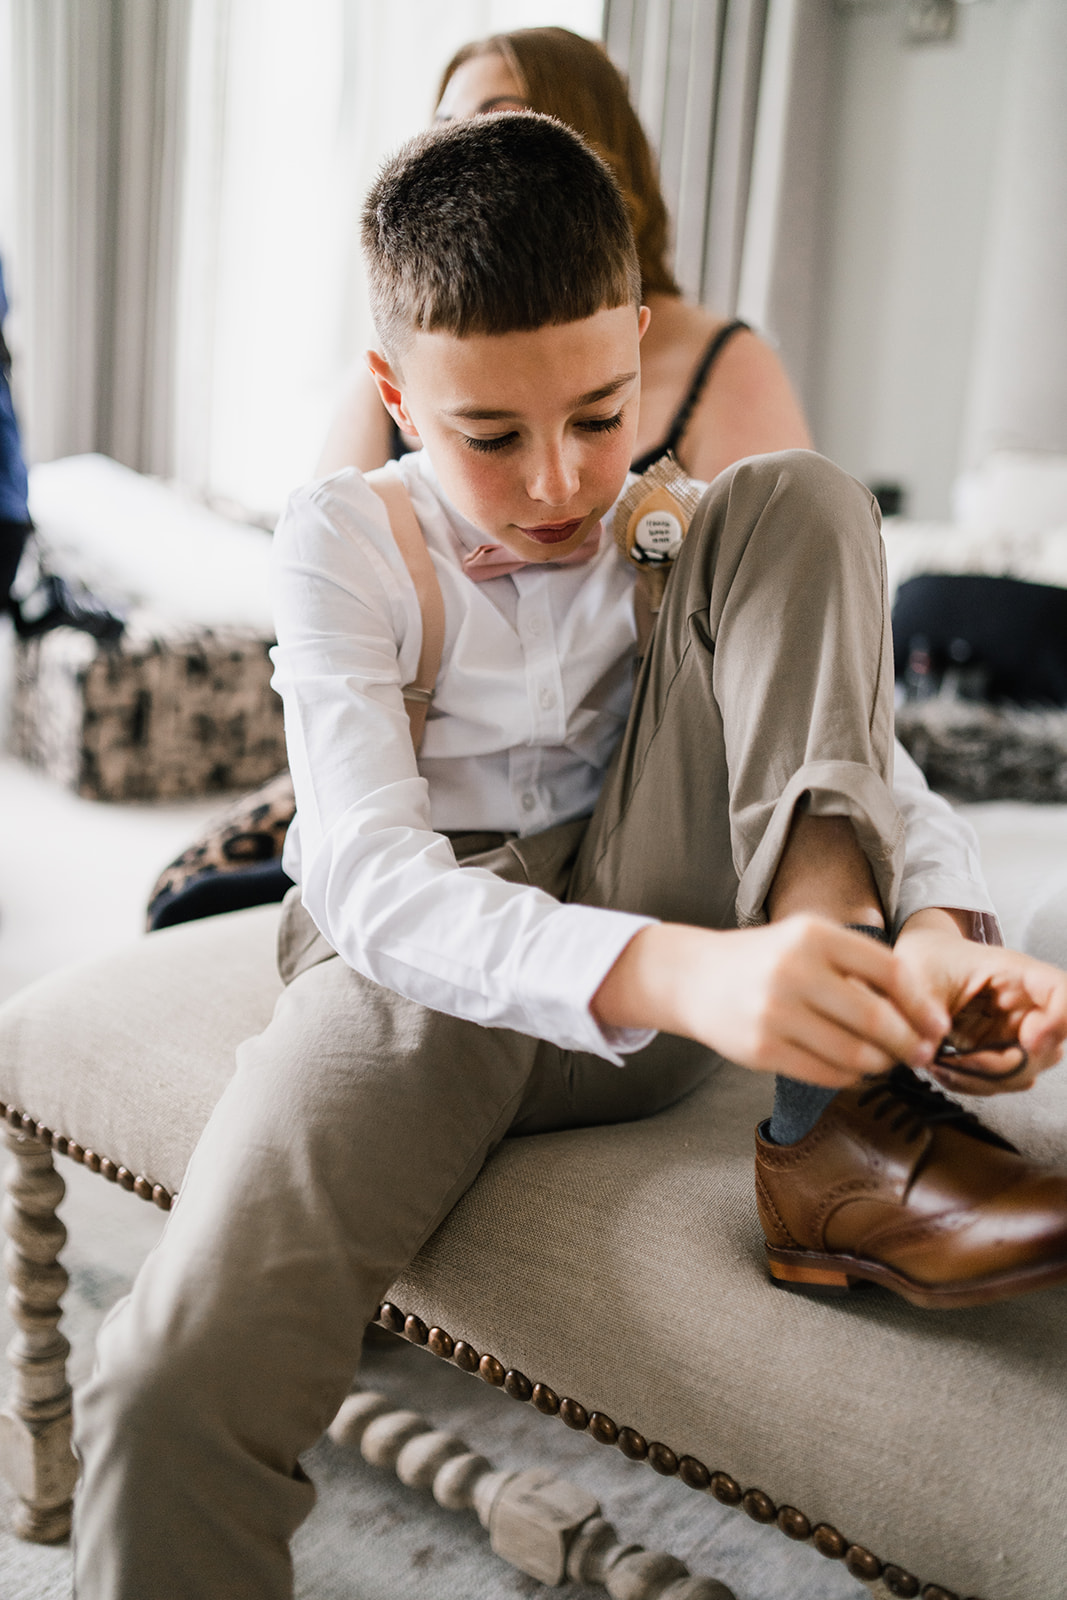 Pageboy tying up his shoes